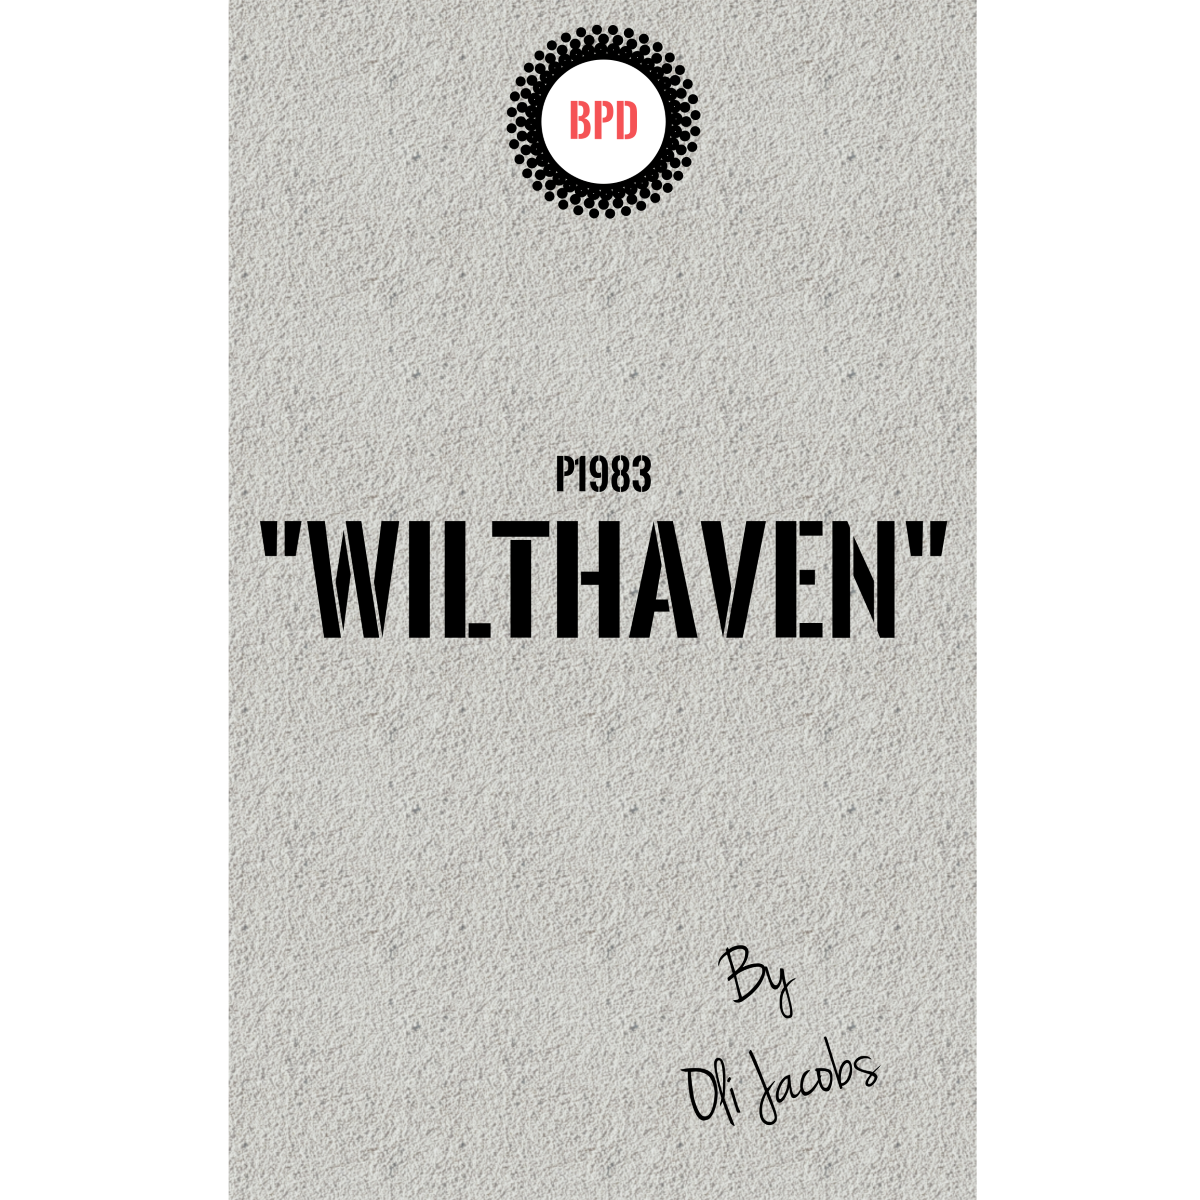 Book Review: Wilthaven by Oli Jacobs